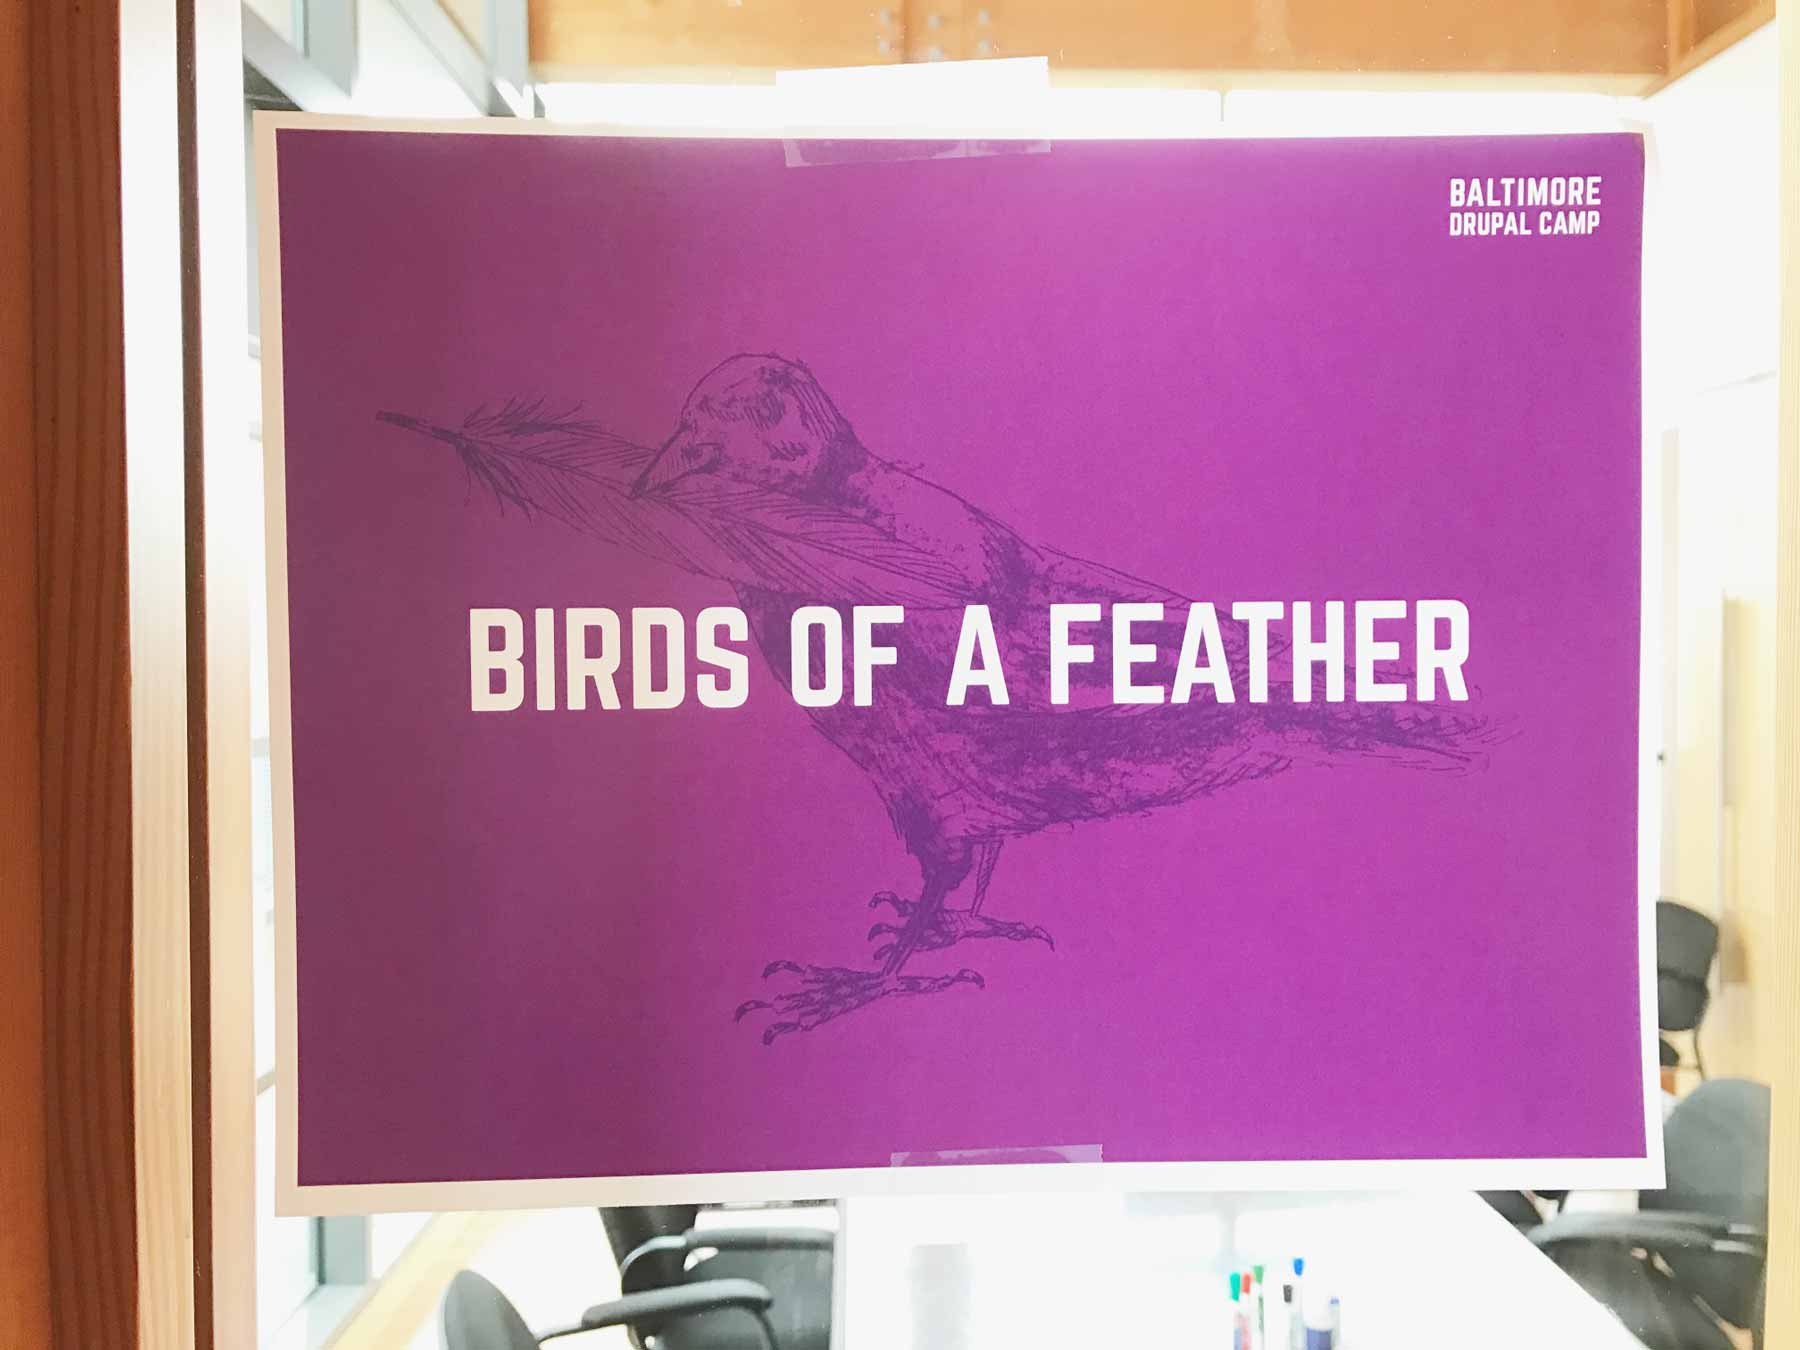 Birds of Feather sign at Baltimore Drupal camp with raven illustration